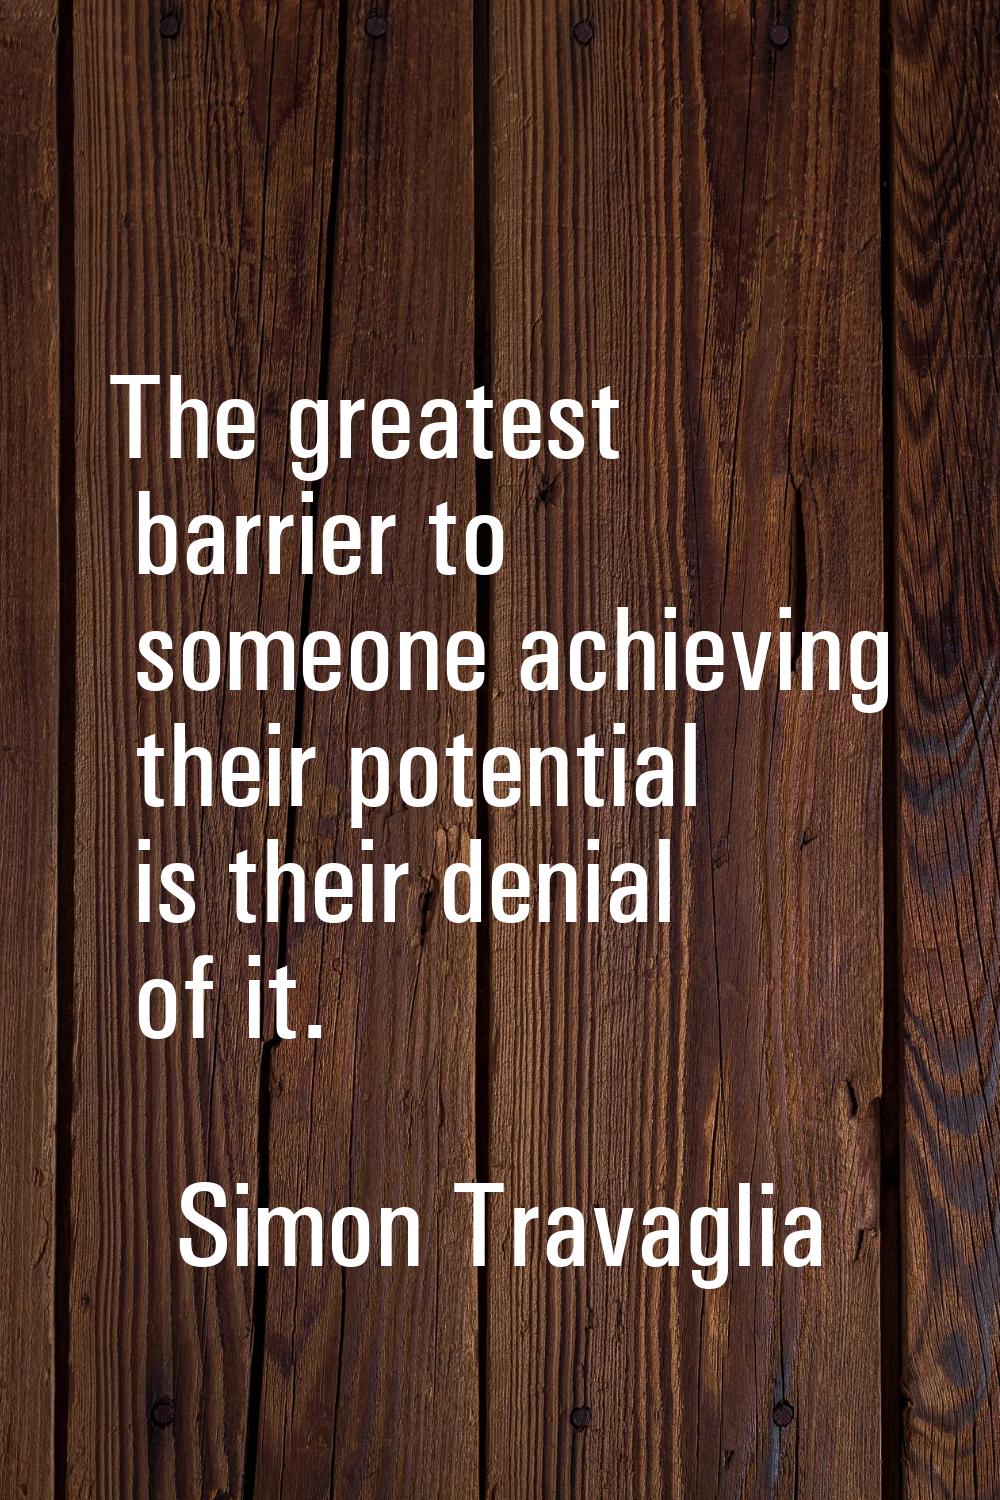 The greatest barrier to someone achieving their potential is their denial of it.